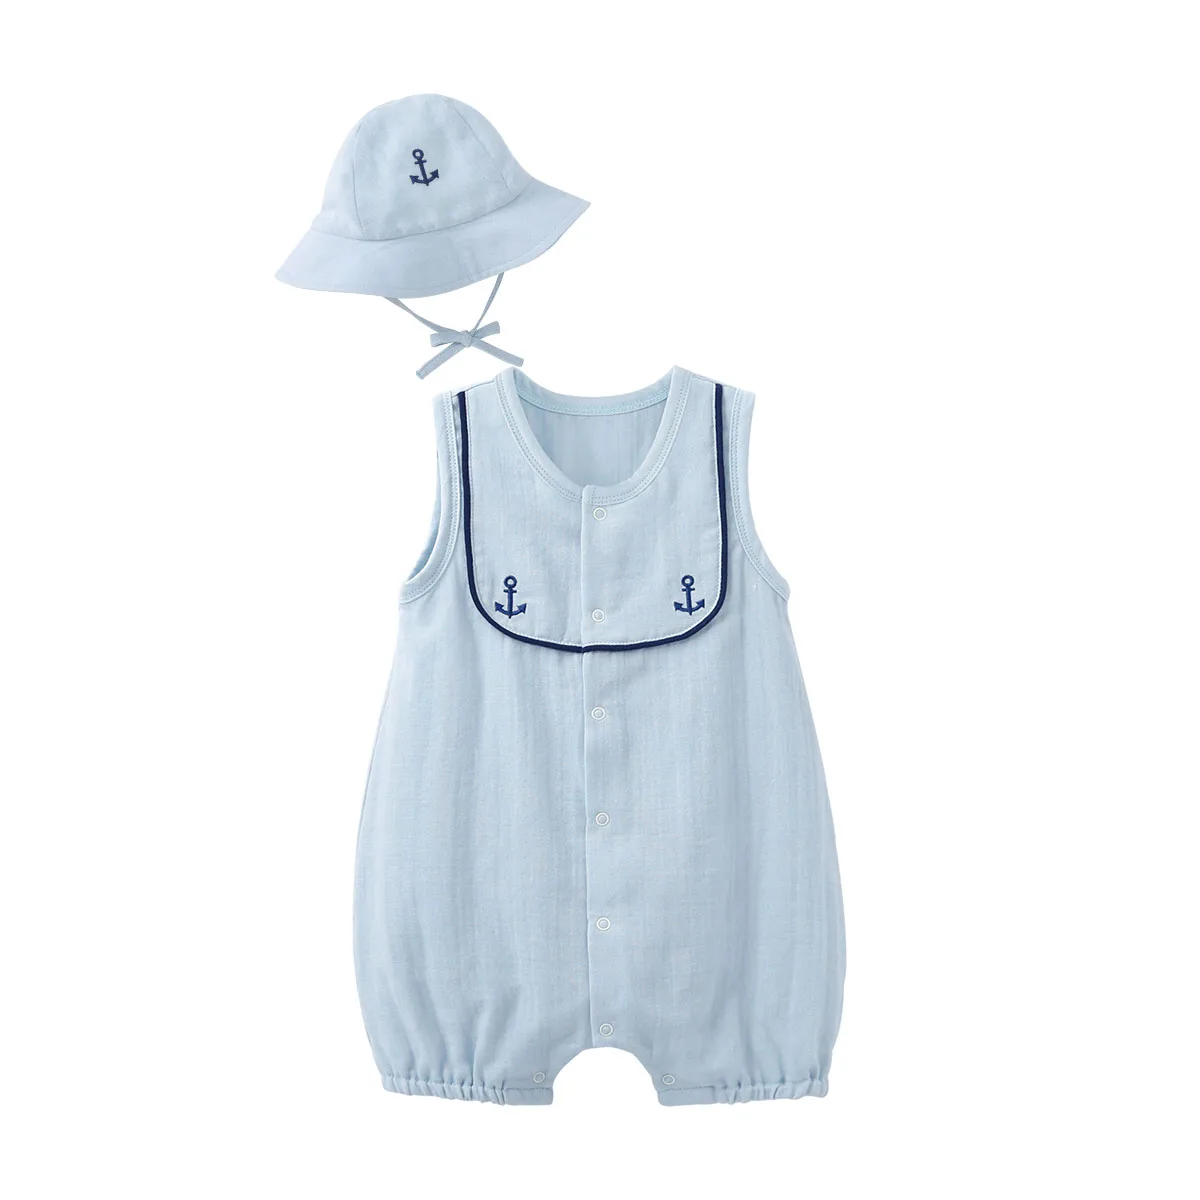 customised baby bodysuits Pureborn Newborn Baby Romper Cotton Sailor Baby Clothes Summer Holiday Romper for Baby Girls Boys Baby Jumpsuit bamboo baby bodysuits	